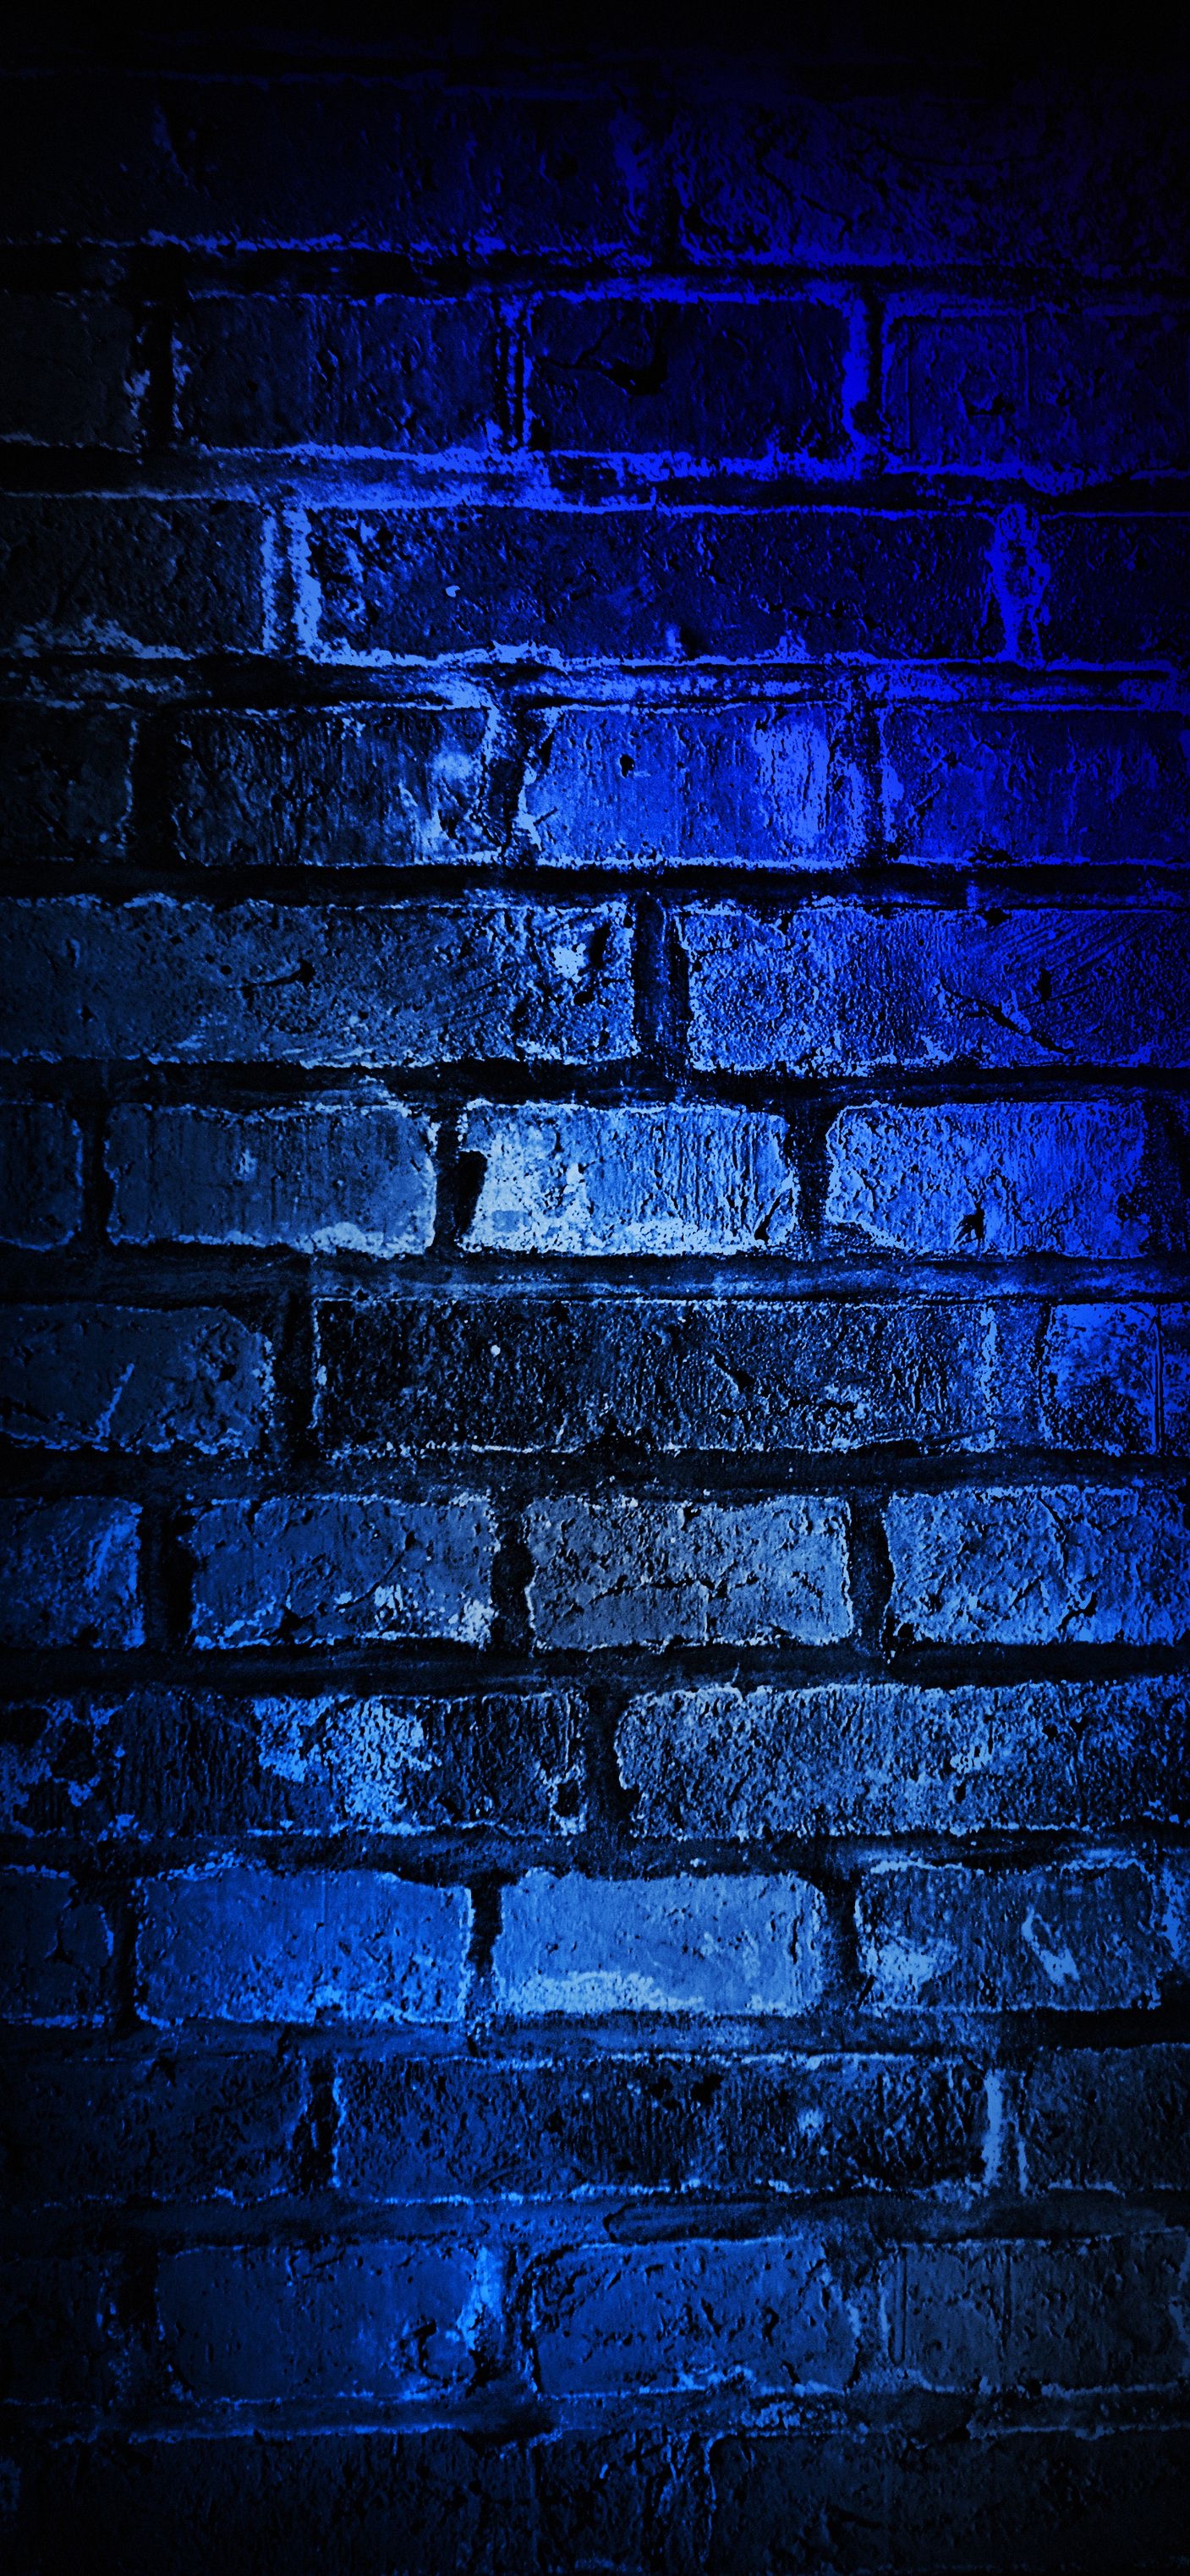 Blue Brick Wall Pictures  Download Free Images on Unsplash